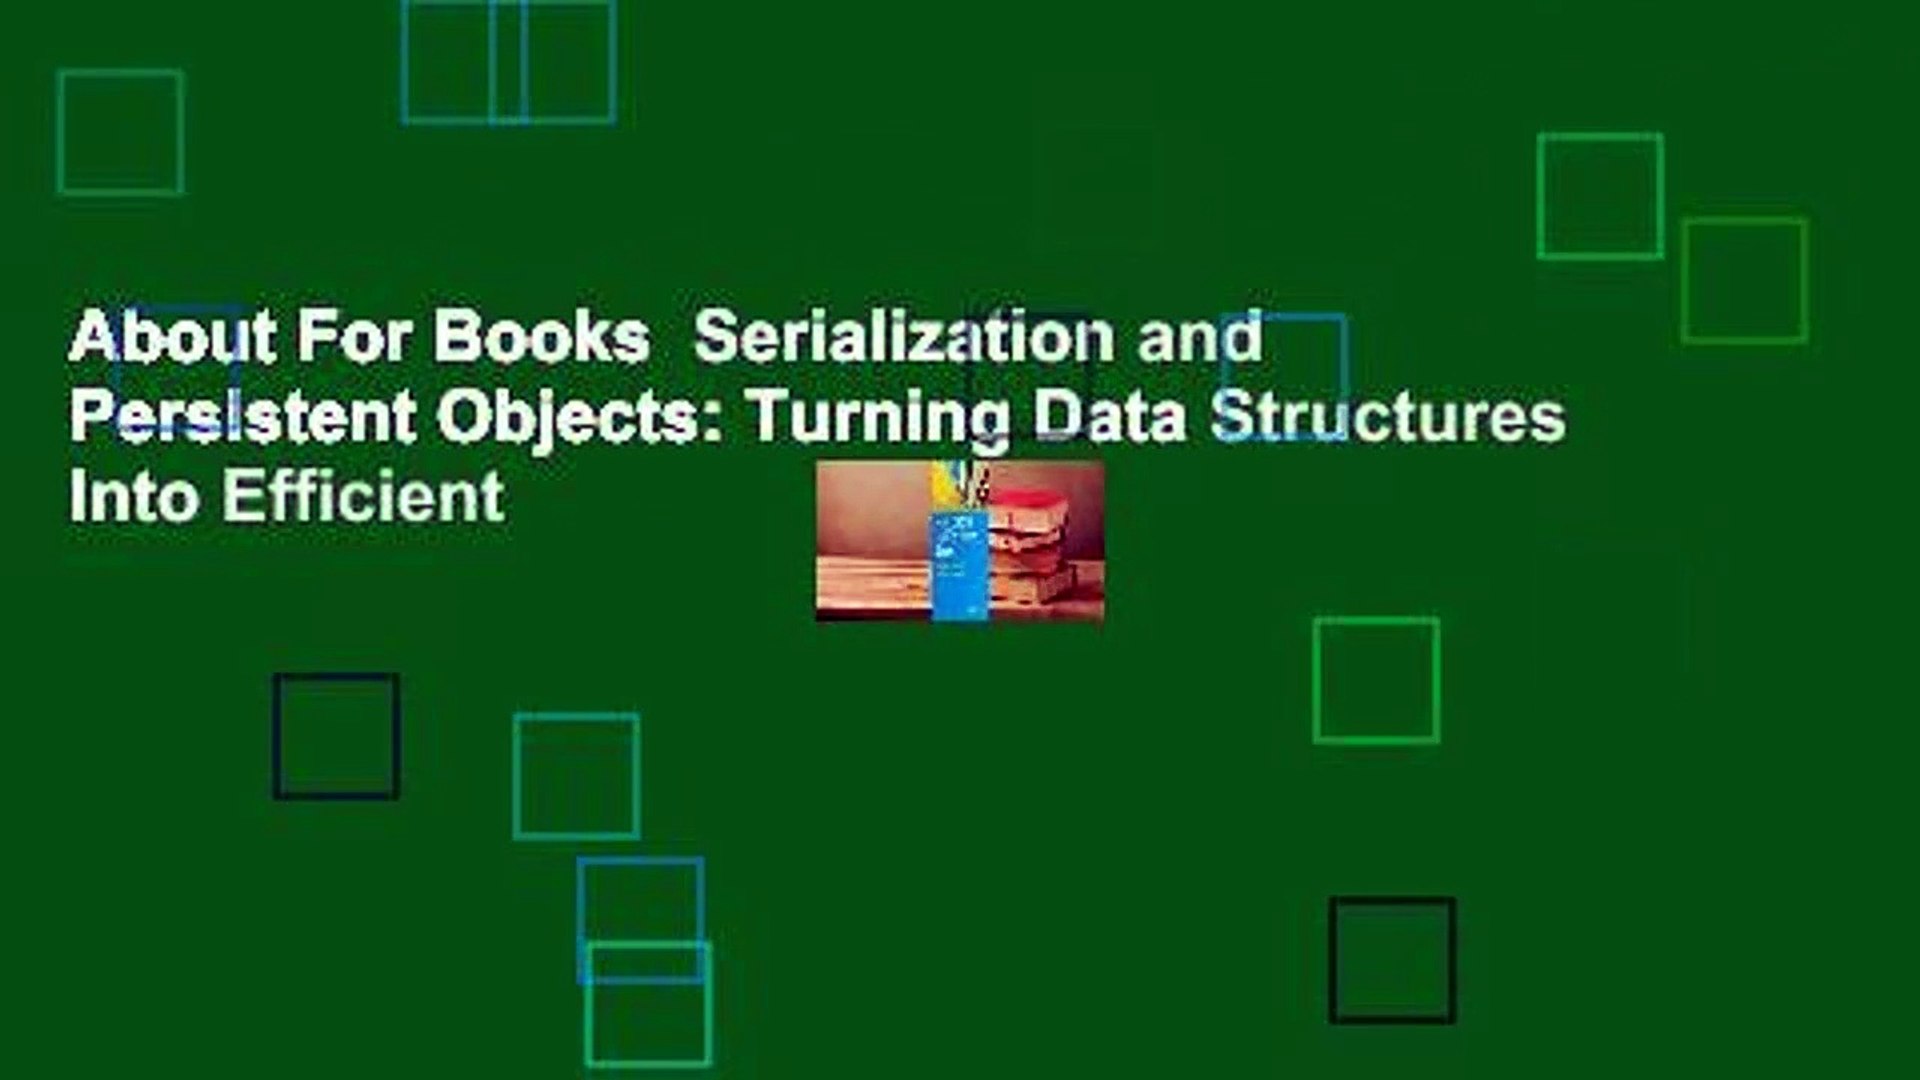 About For Books  Serialization and Persistent Objects: Turning Data Structures Into Efficient